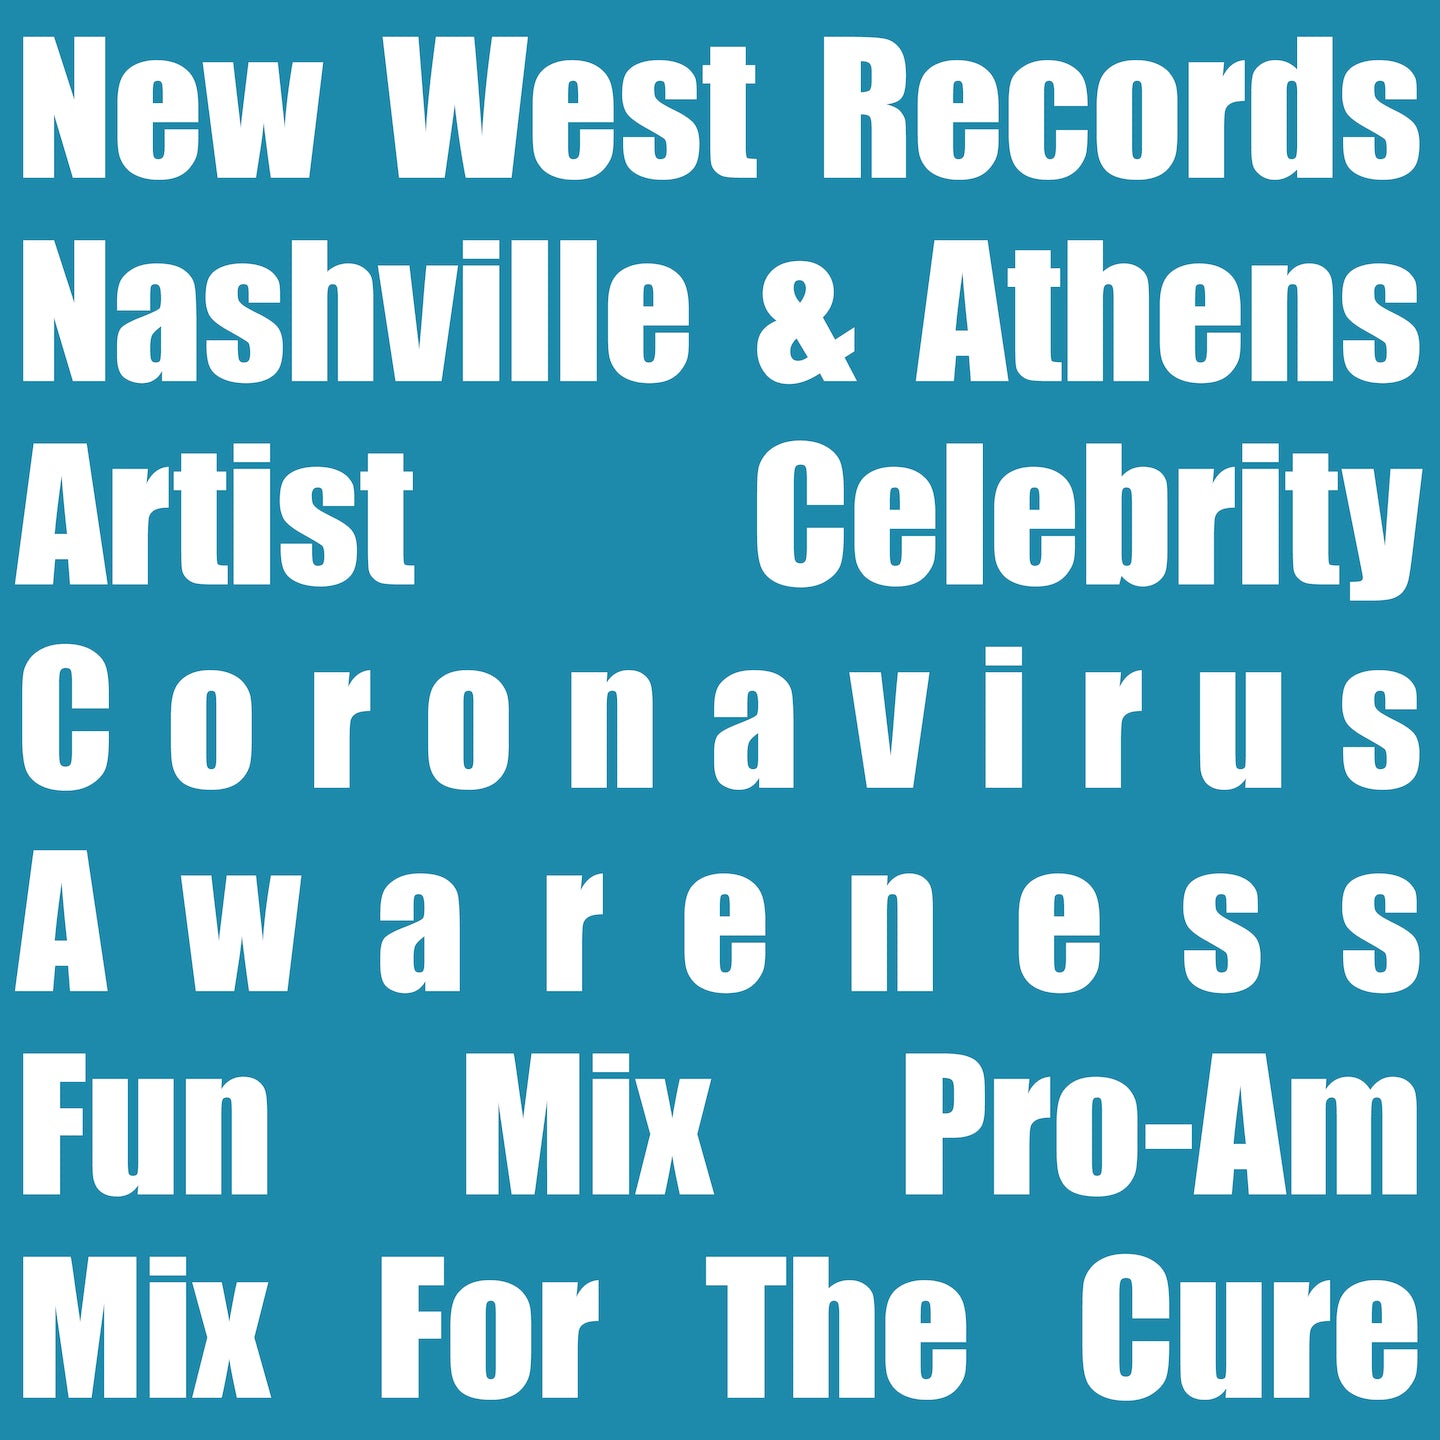 New West Records Nashville & Athens Artist Celebrity Coronavirus Awareness Fun Mix Pro-Am Mix For The Cure